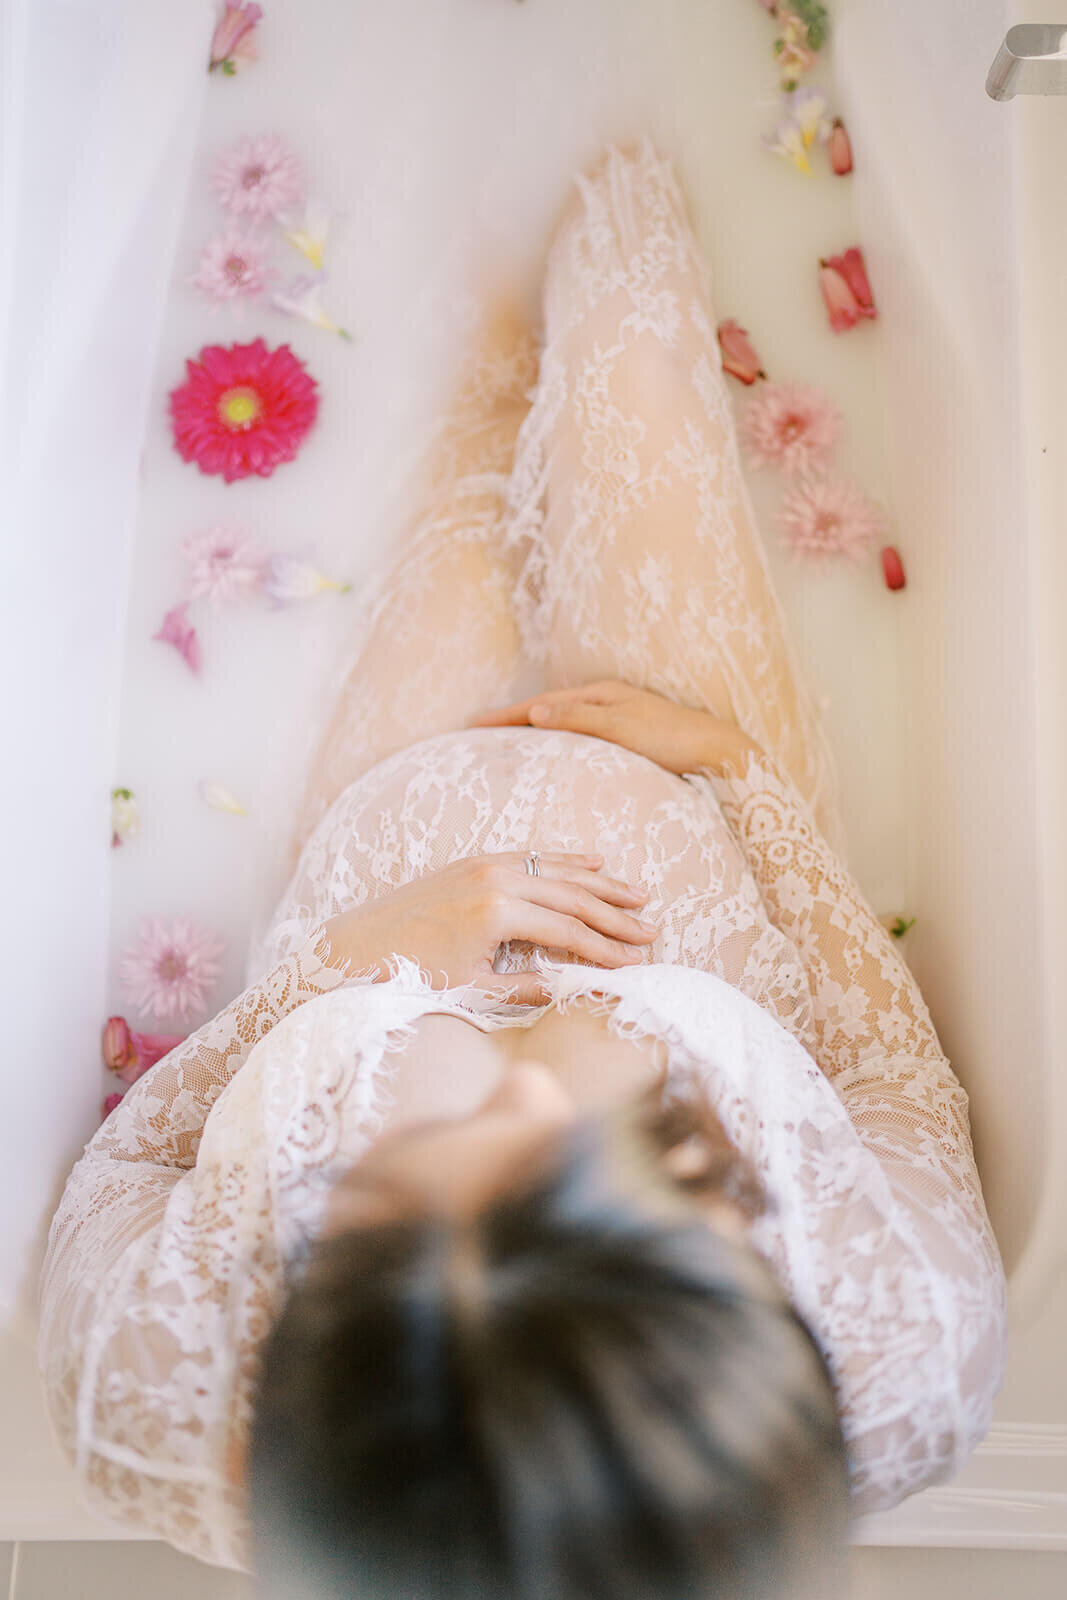 Anticipating joy, an Asian mum in a lace white gown embraces her pregnancy glow at a Gold Coast milk bath maternity photoshoot.